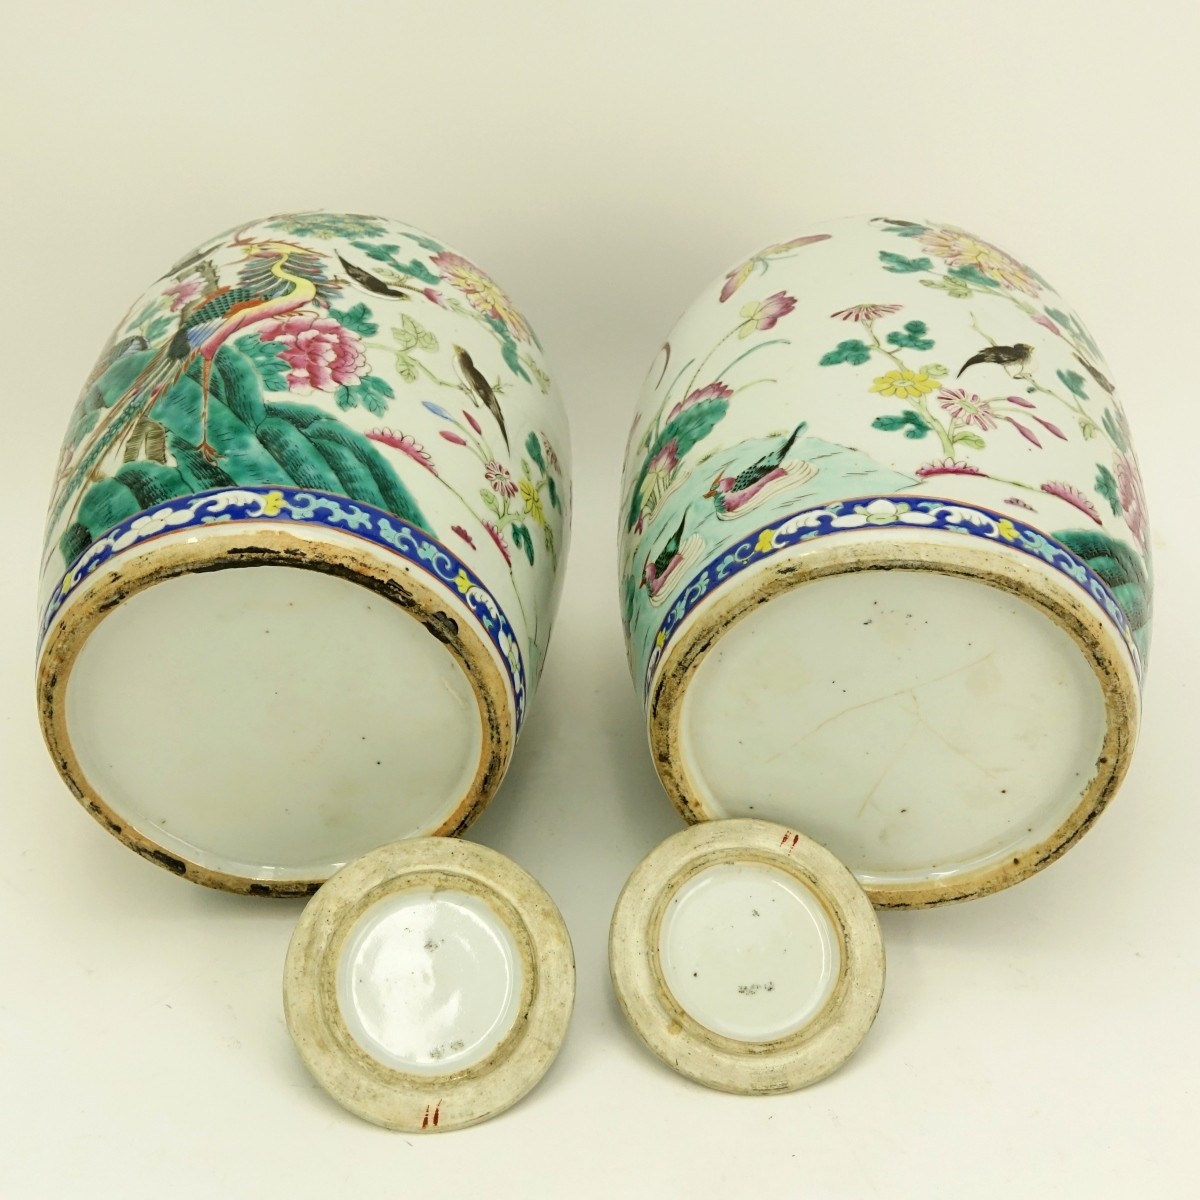 Pair of Chinese Famille Rose Tall Jars